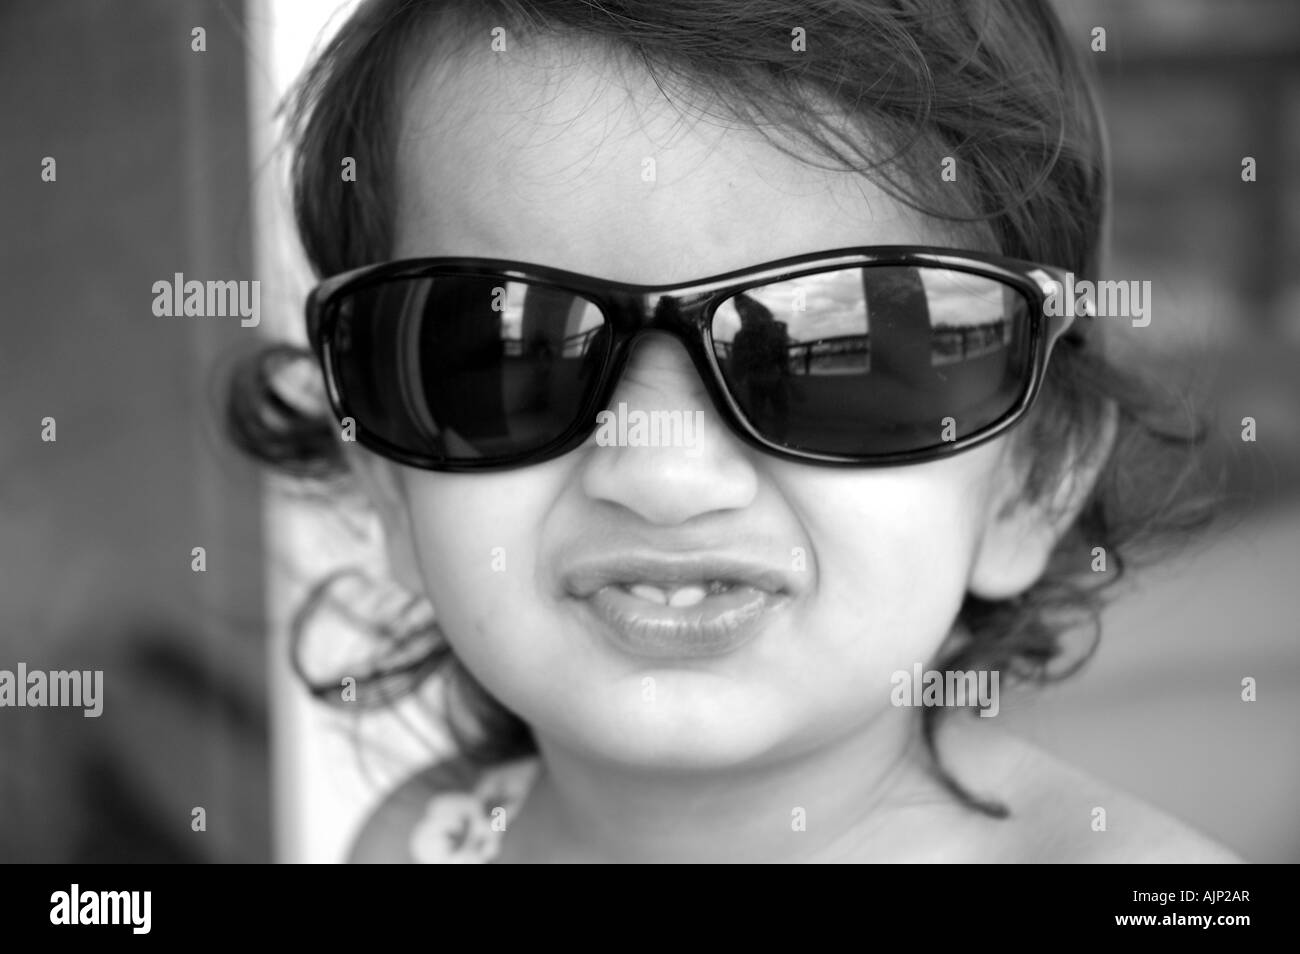 A small girl wearing goggles, Close-up Stock Photo